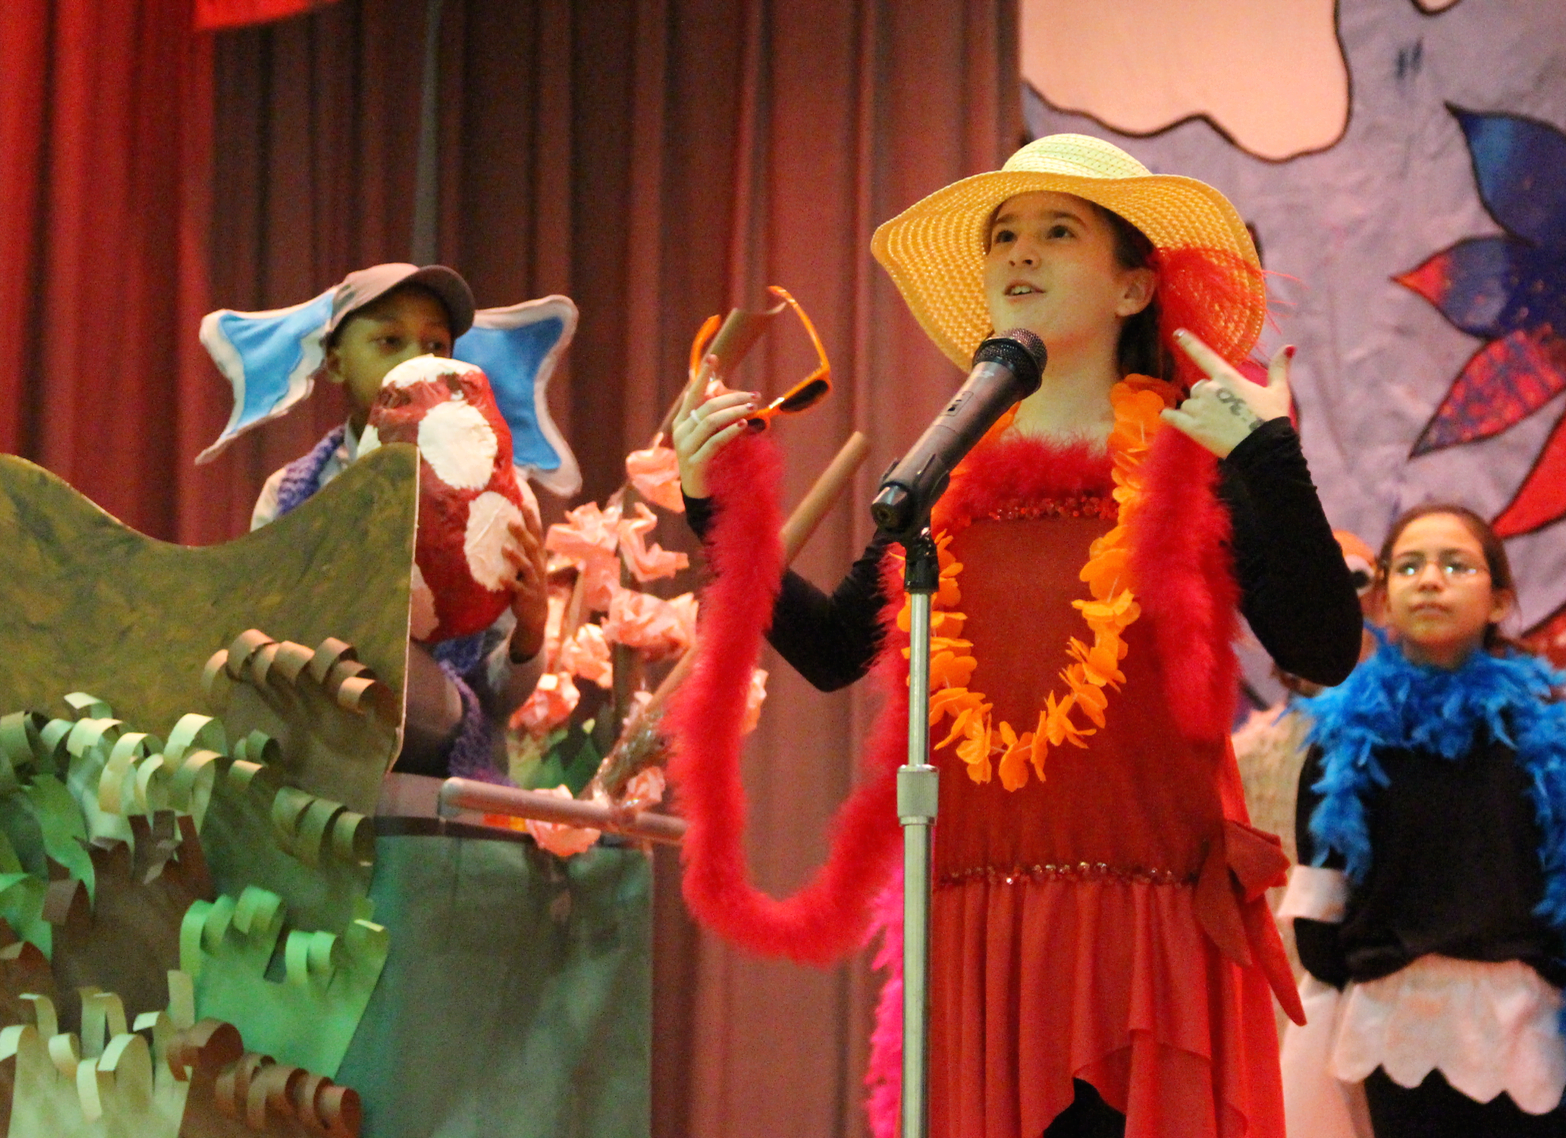 New Lebanon School rehearsed Seussical, to be performed on Tuesday, Nov. 20, 2018 Photo: Leslie Yager